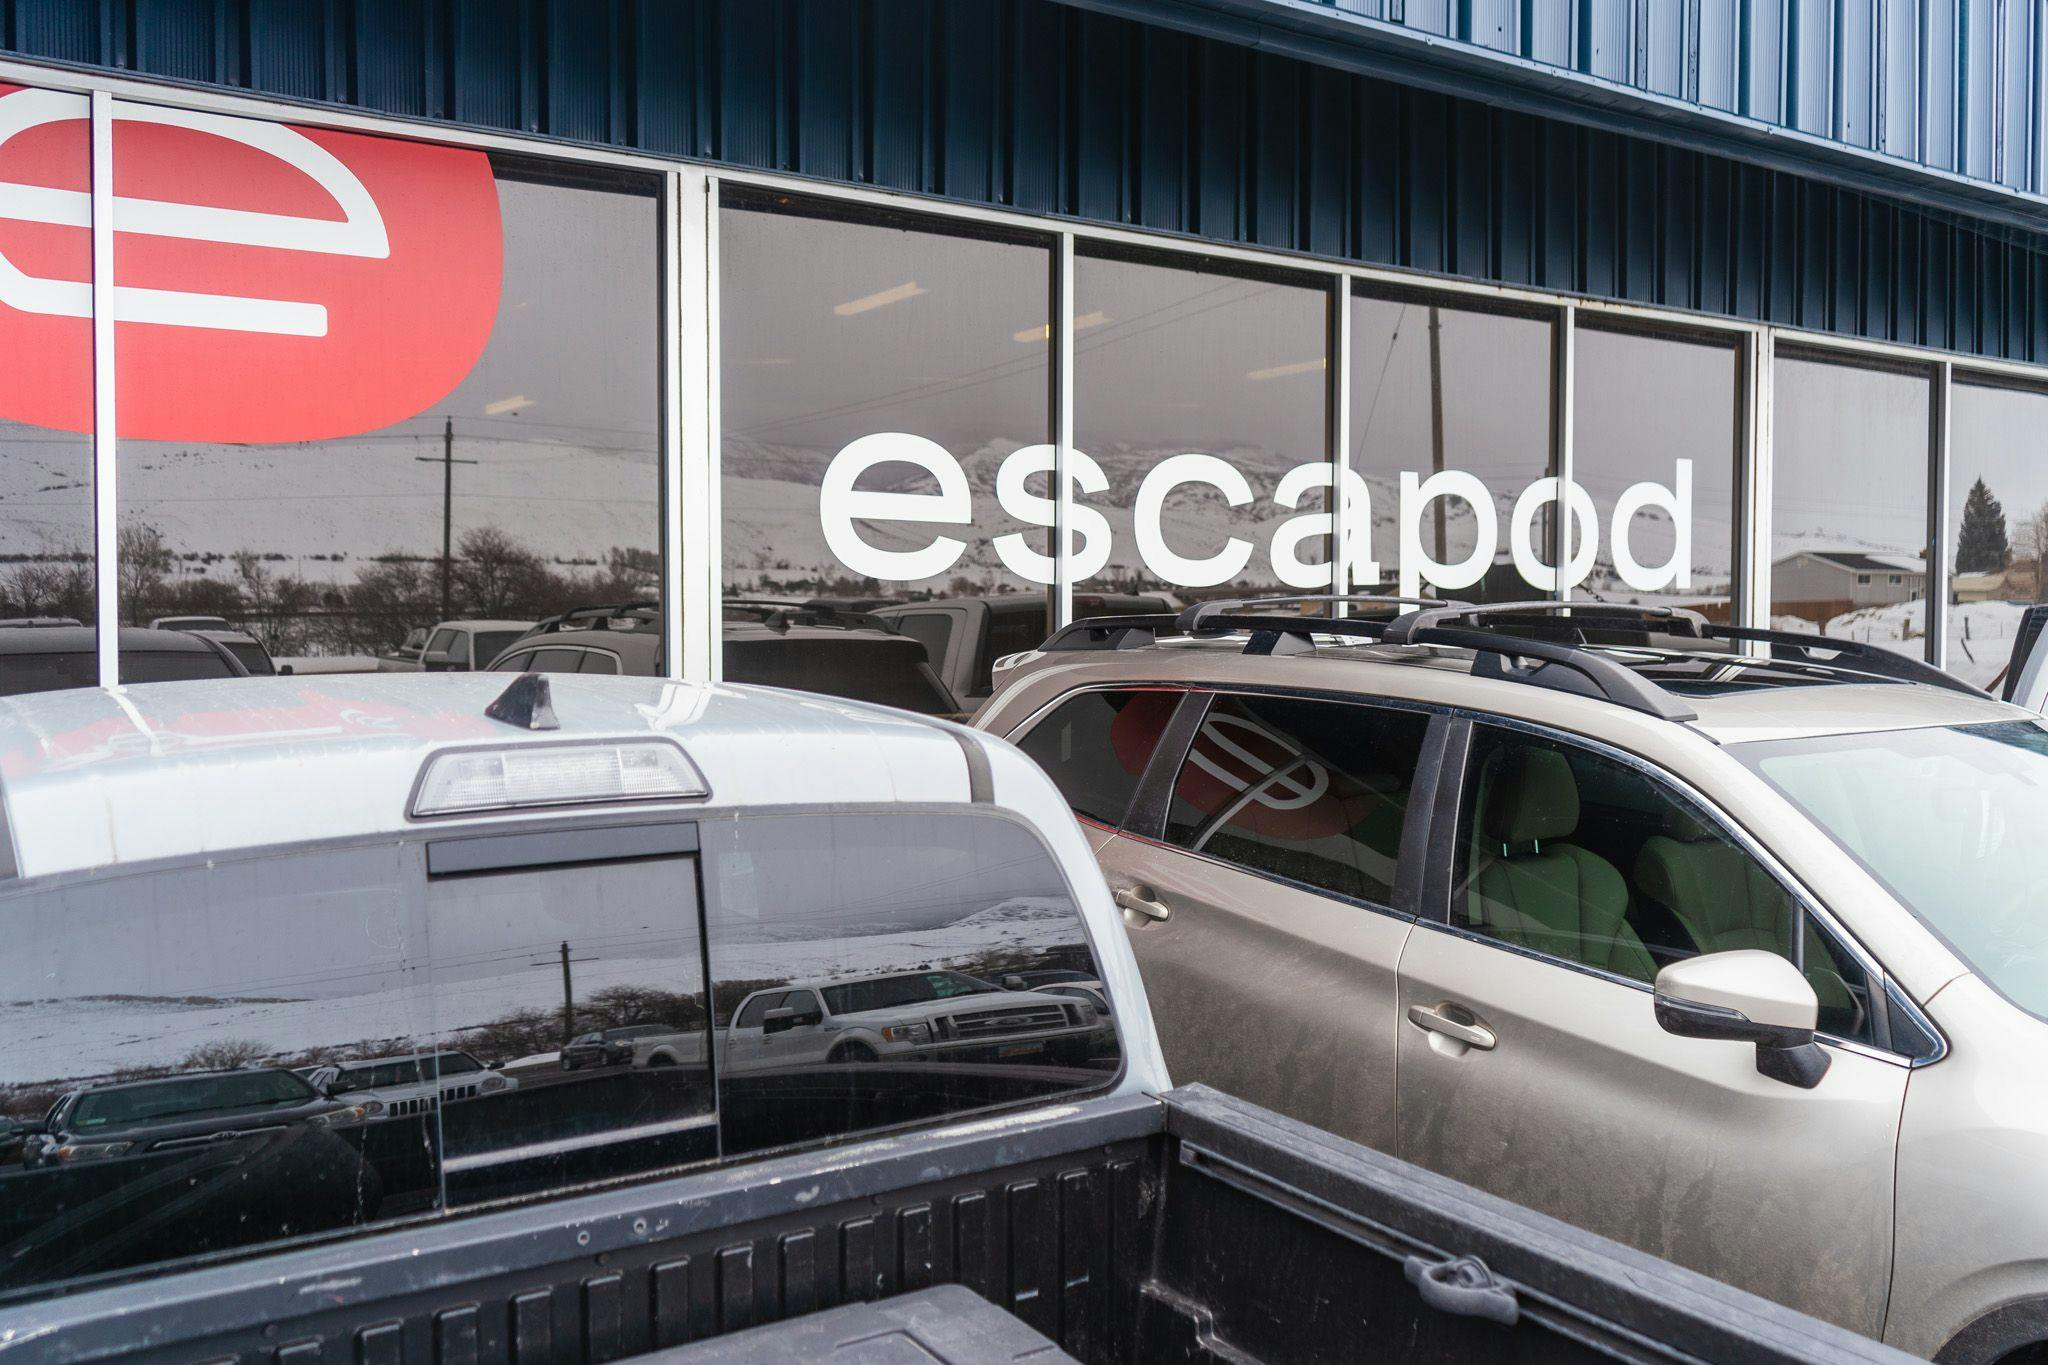 The Escapod Headquarters building with our classic E logo on the front, where we build of our offroad trailers.